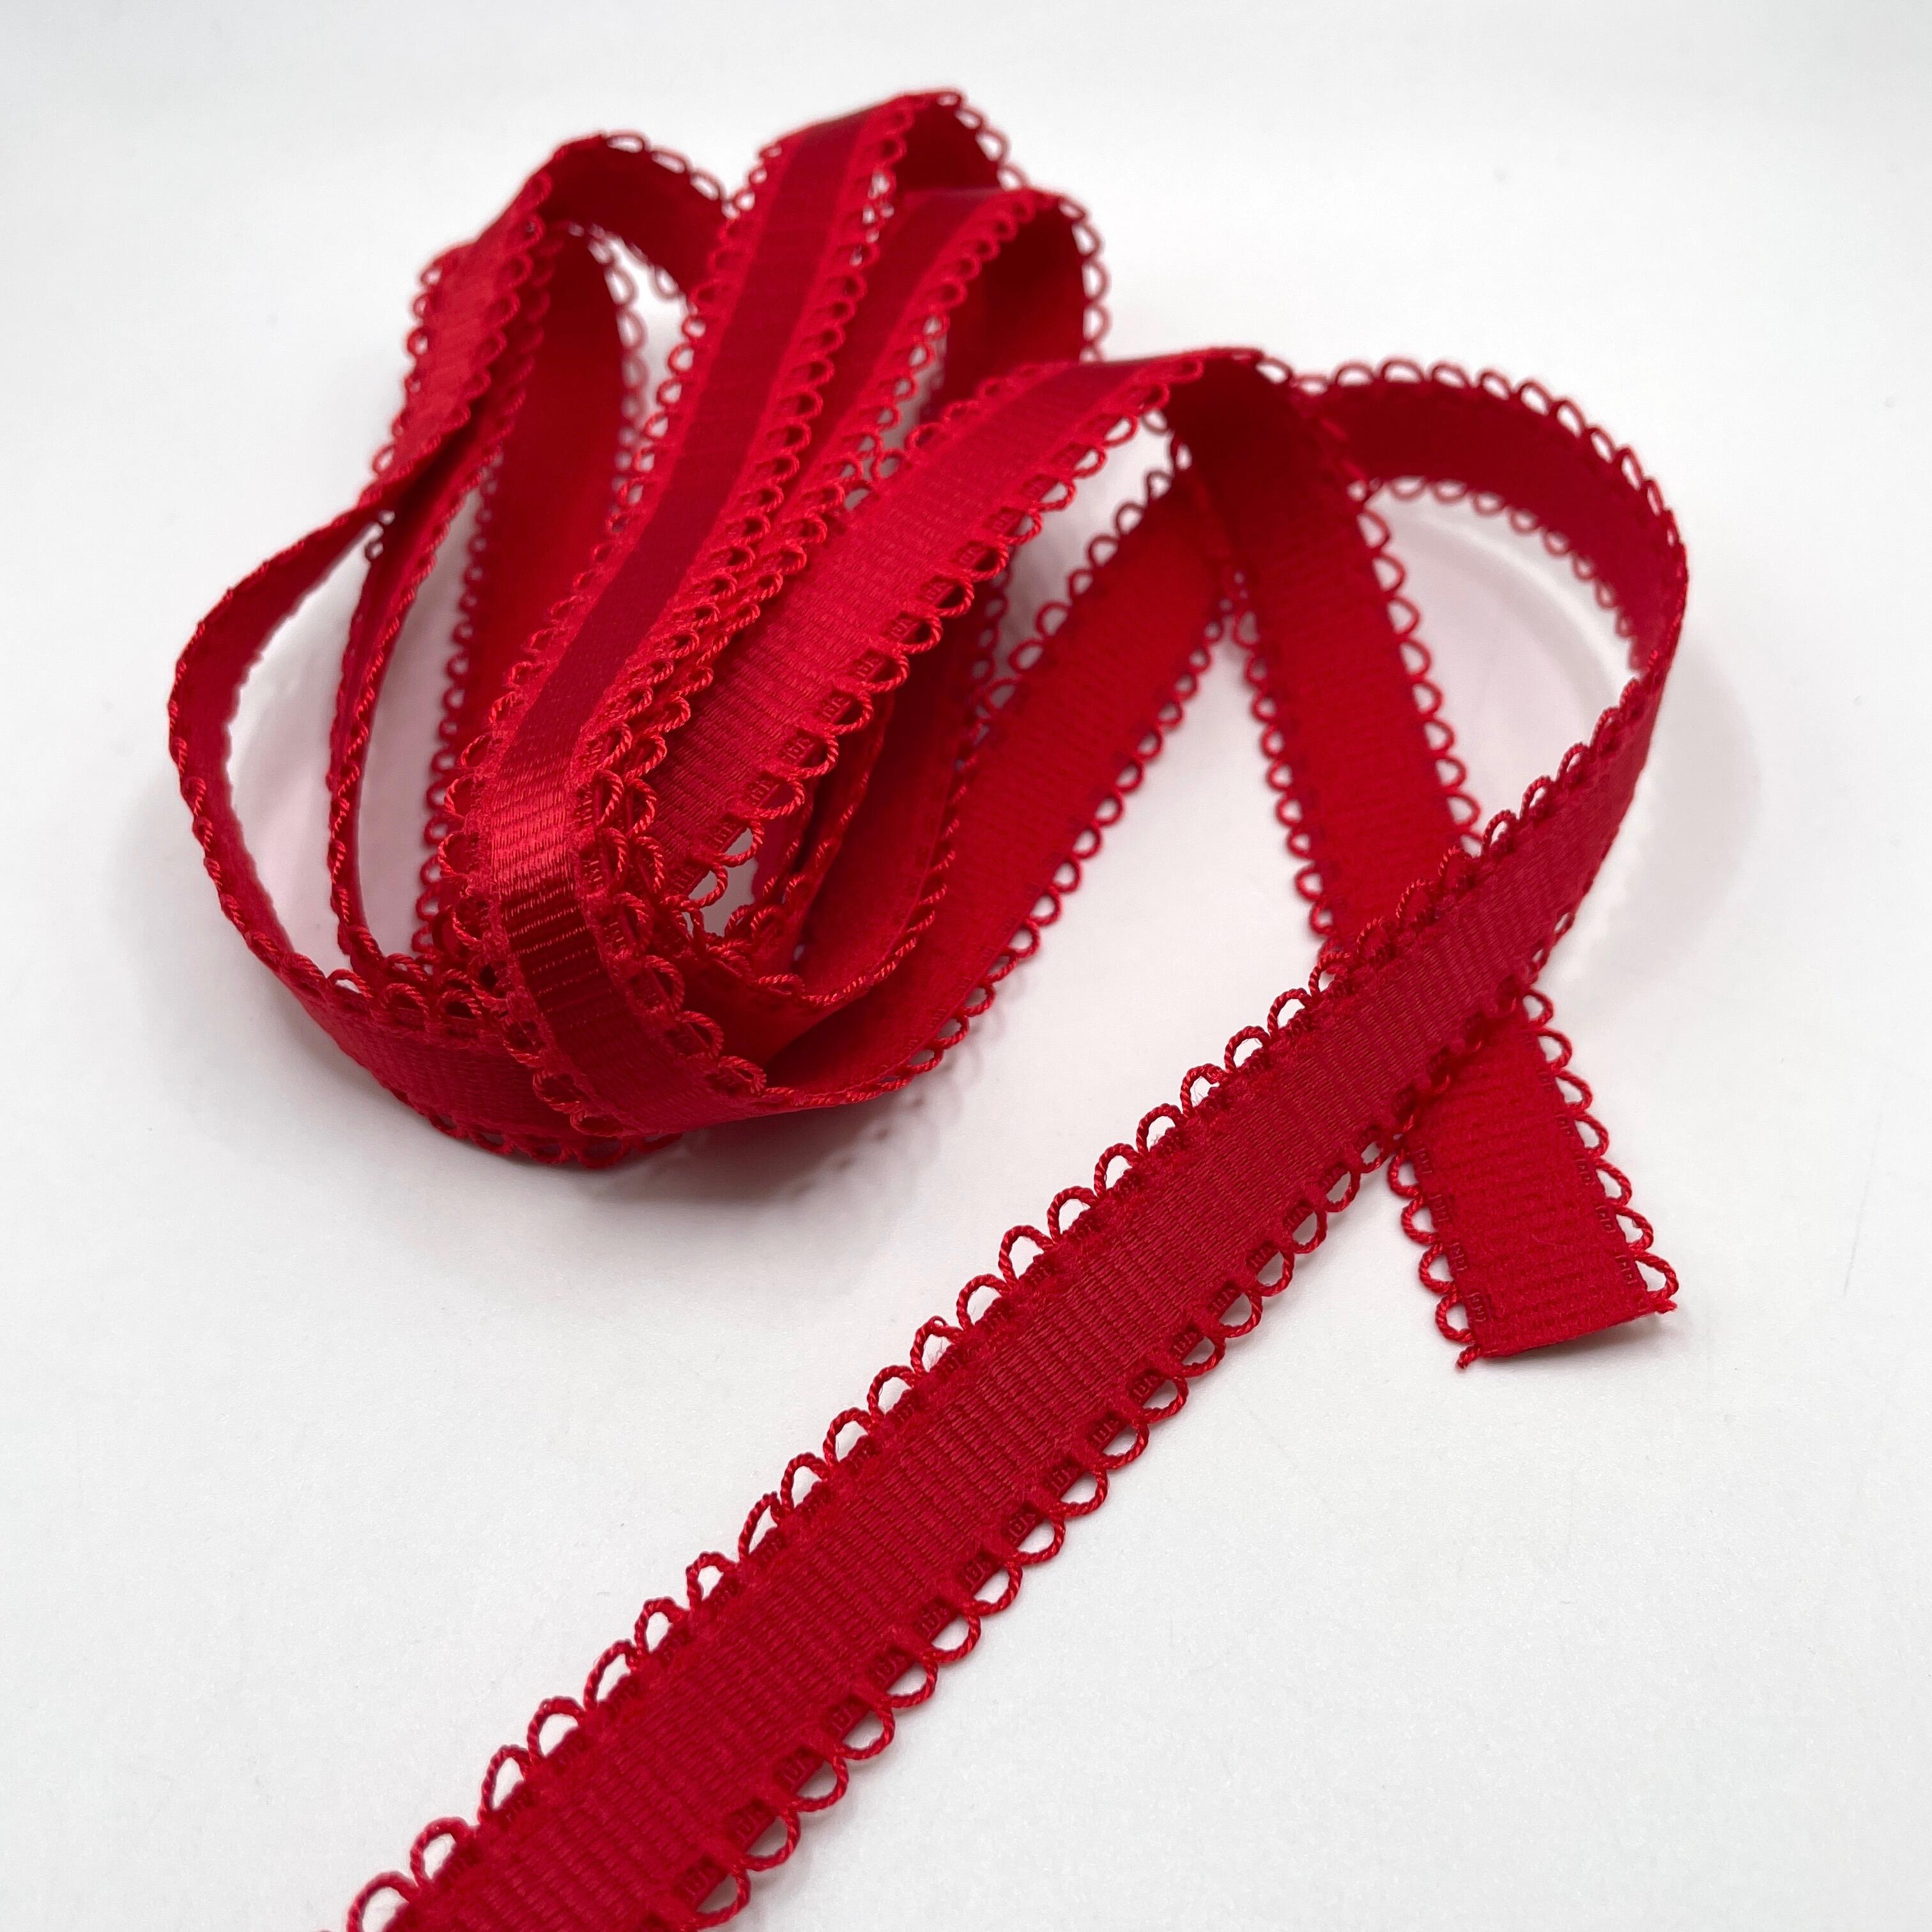 Elastic - Bra Strap - Looped Edge (SW00860) satin face, with plush back -  12-15mm TRUE RED 3439